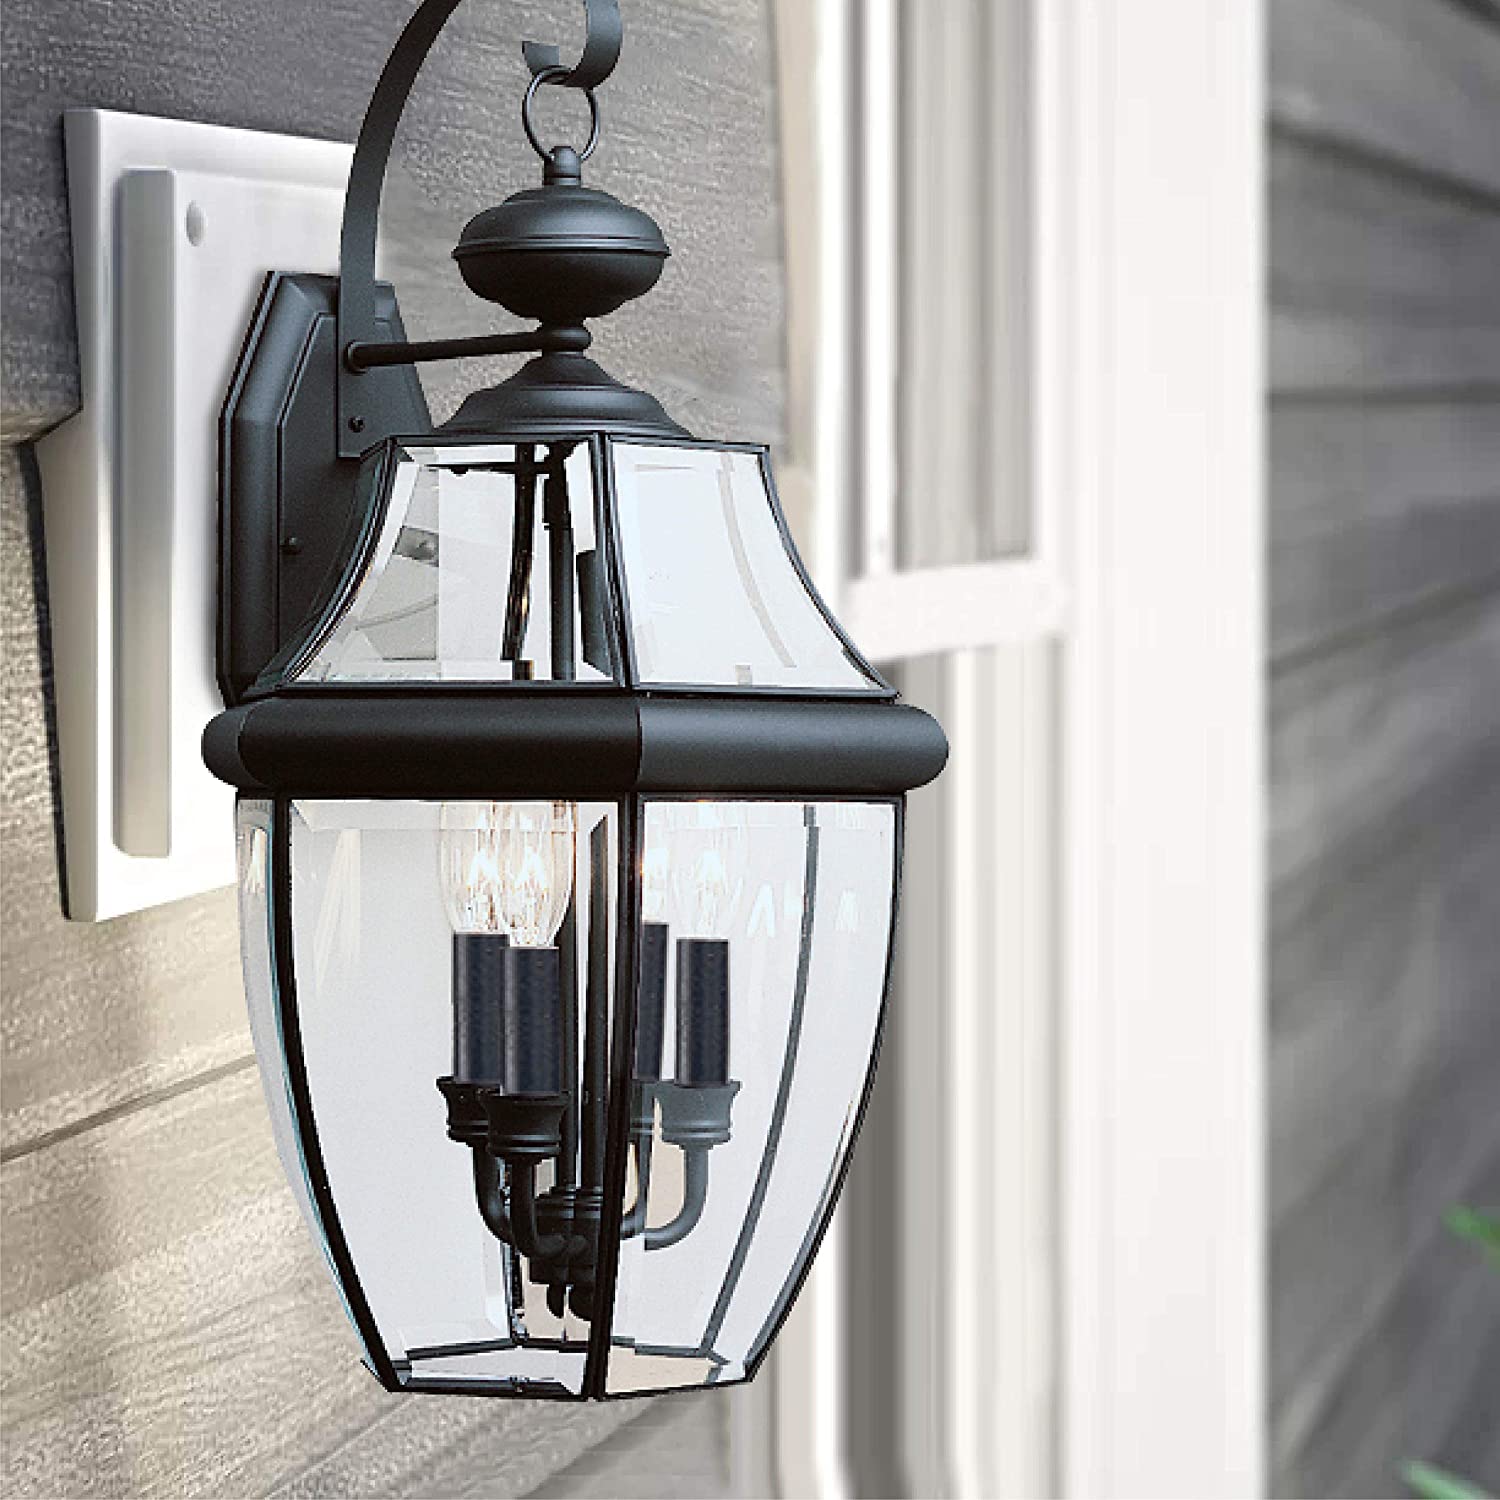 Sea Gull Lighting 8039-12 2-Light Lancaster Medium Outdoor Wall Lantern, Clear Beveled Glass and Black, Finish: Black By Visit the Sea Gull Lighting Store - image 2 of 5